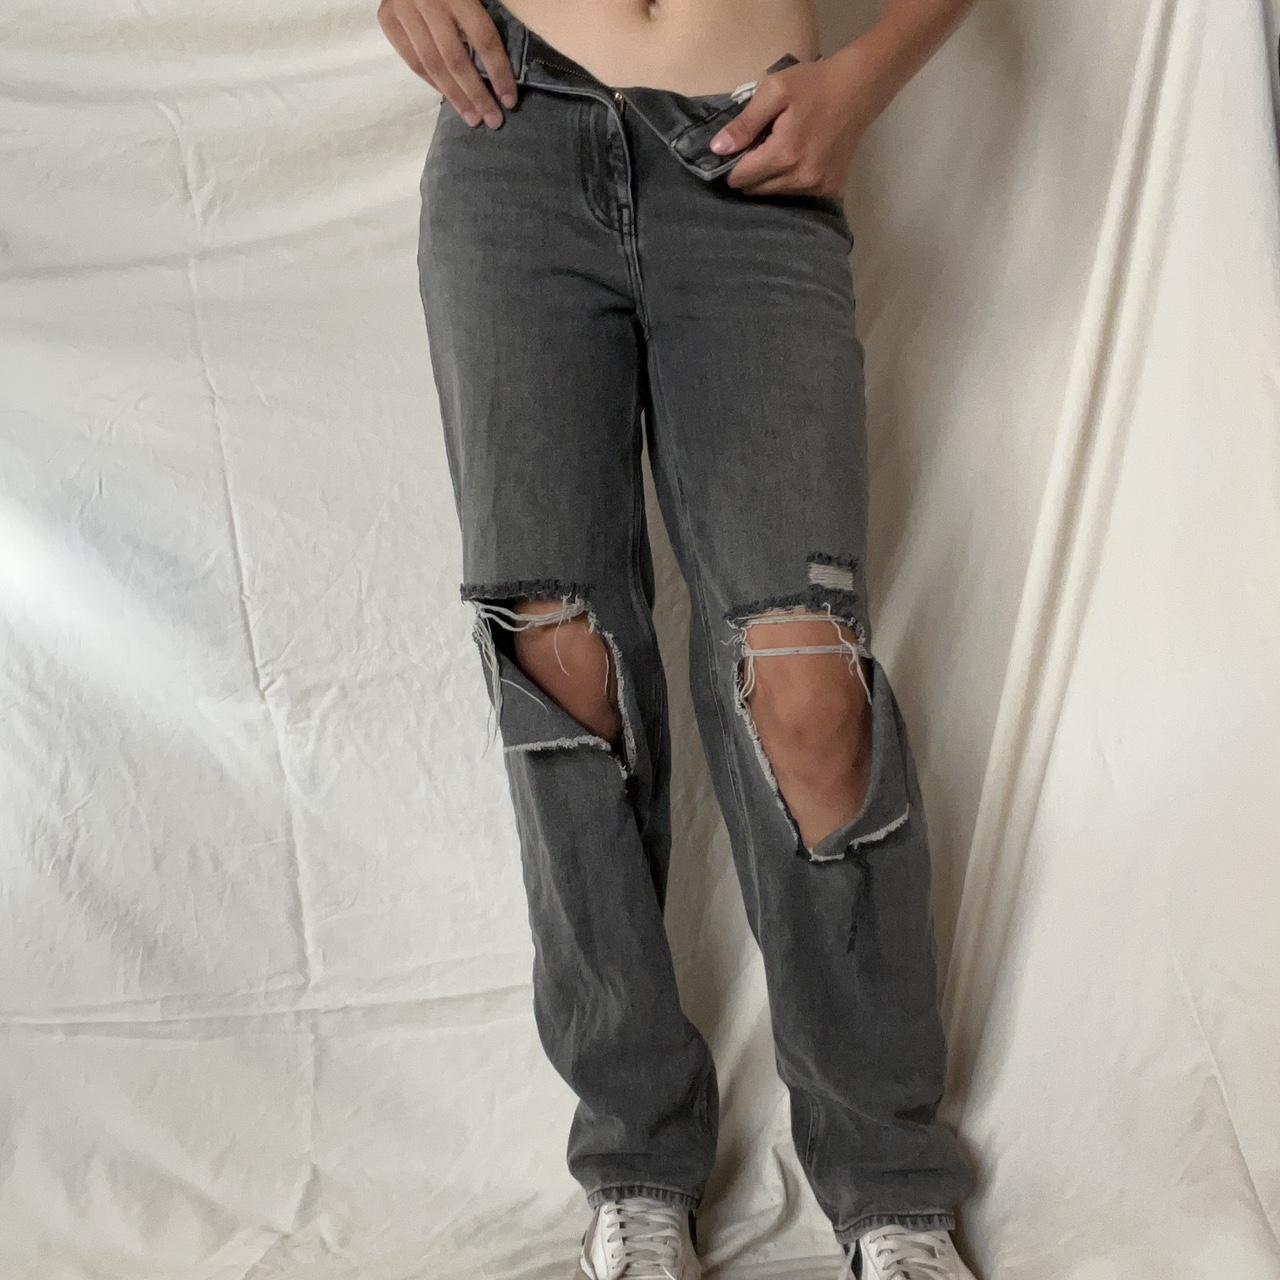 PacSun Washed Black Ripped '90s Boyfriend Jeans